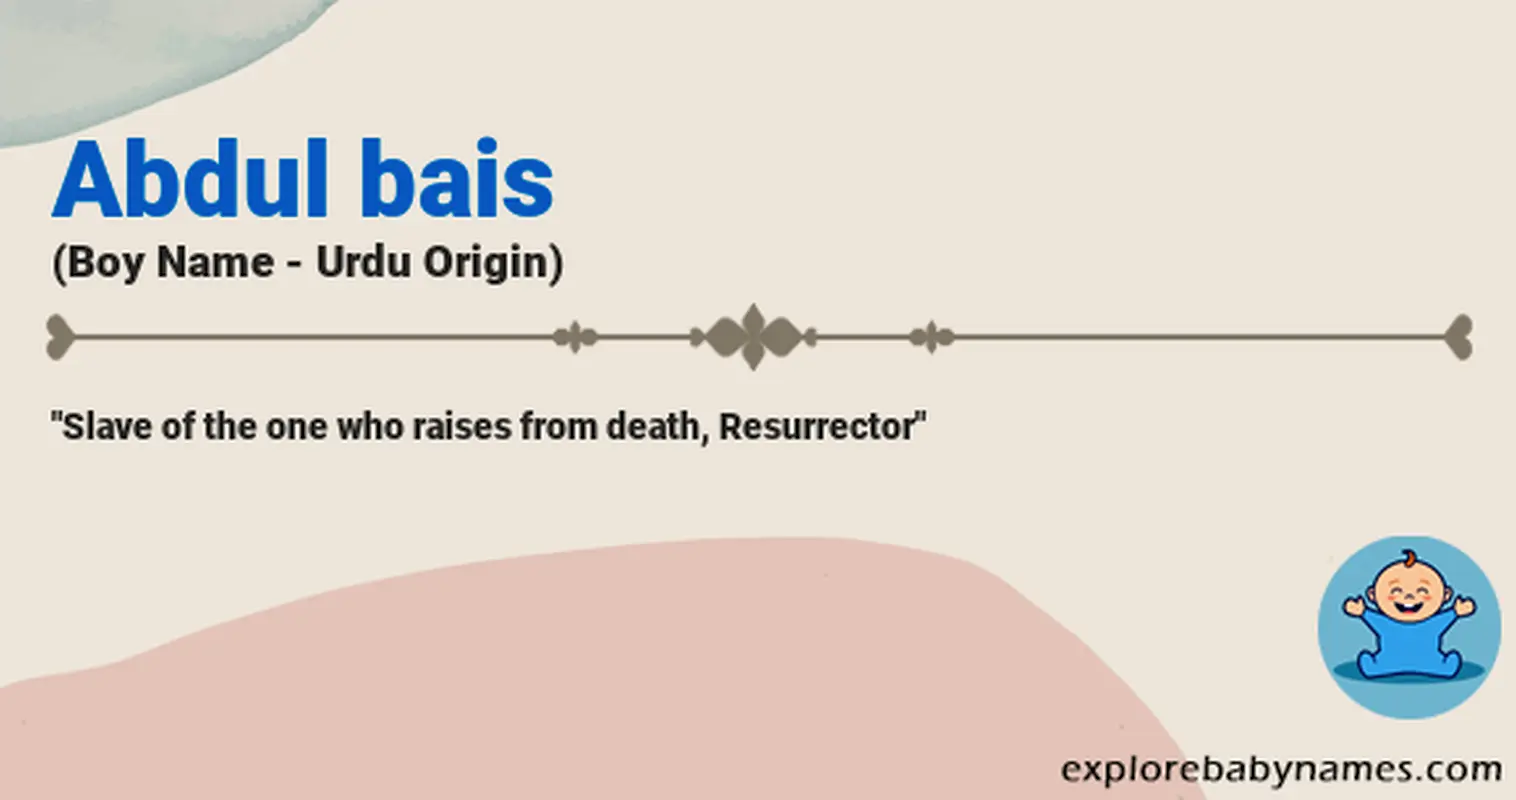 Meaning of Abdul bais